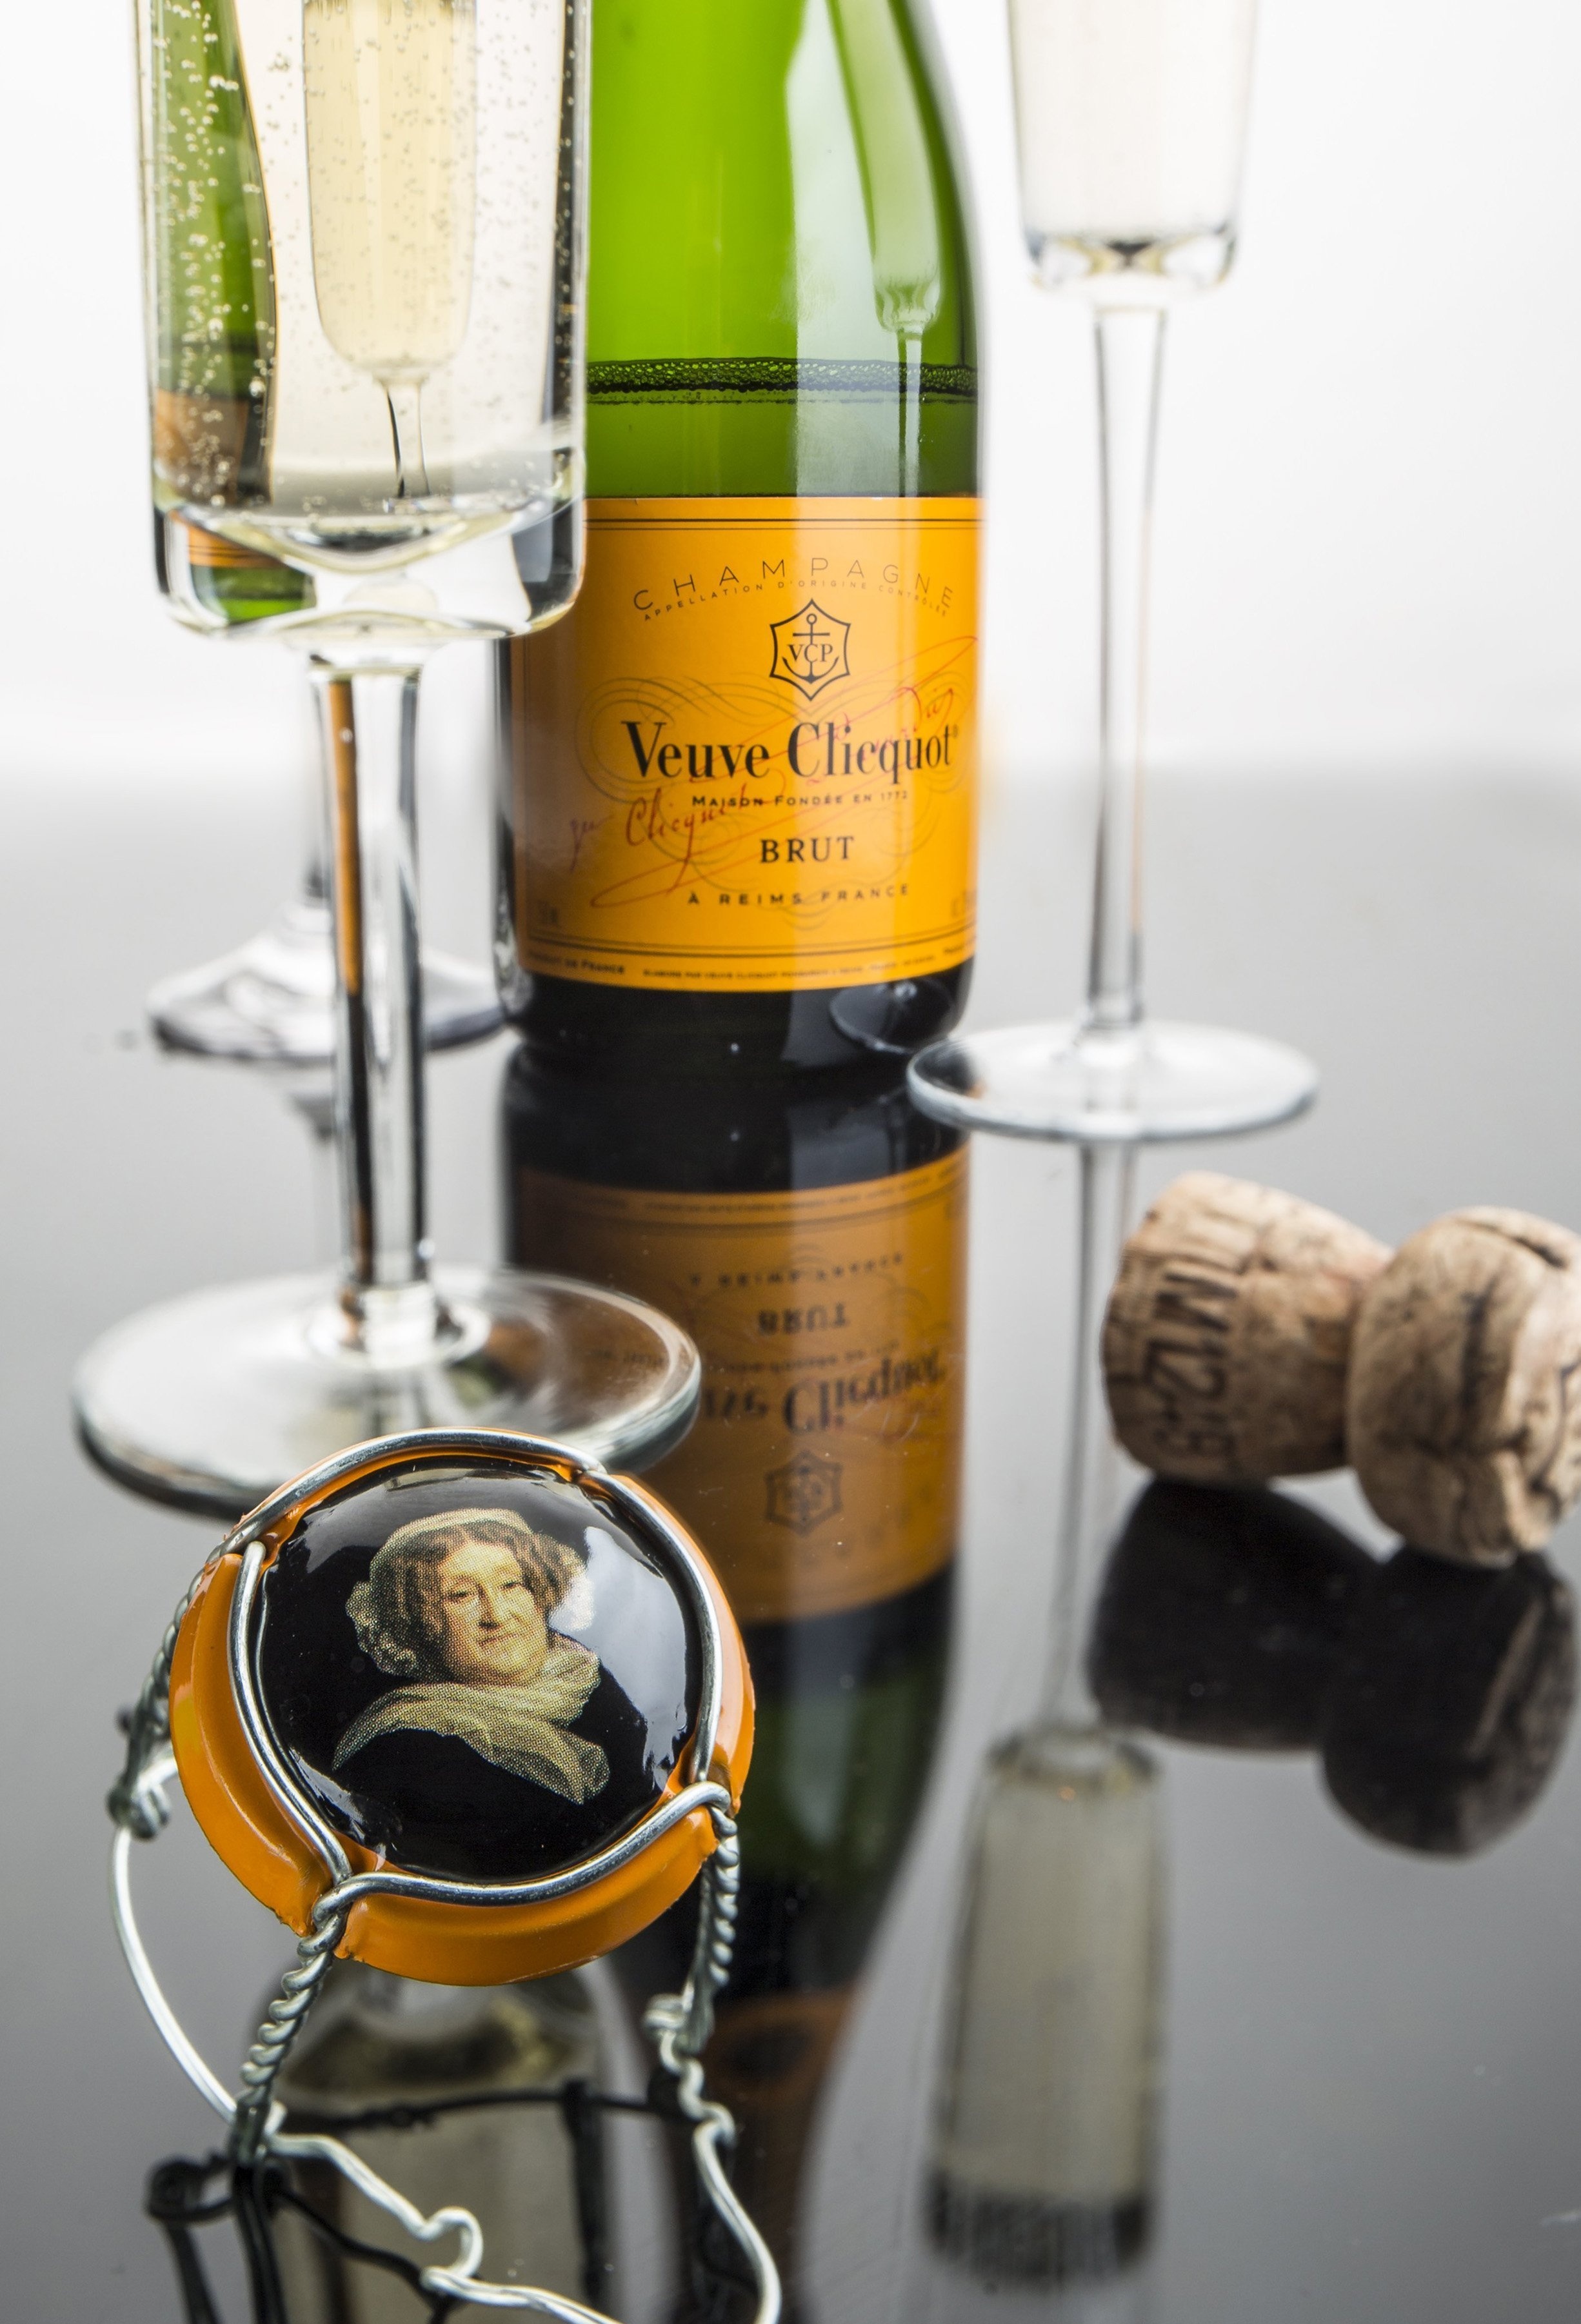 French widow Clicquot created the famous modern Champagne brand